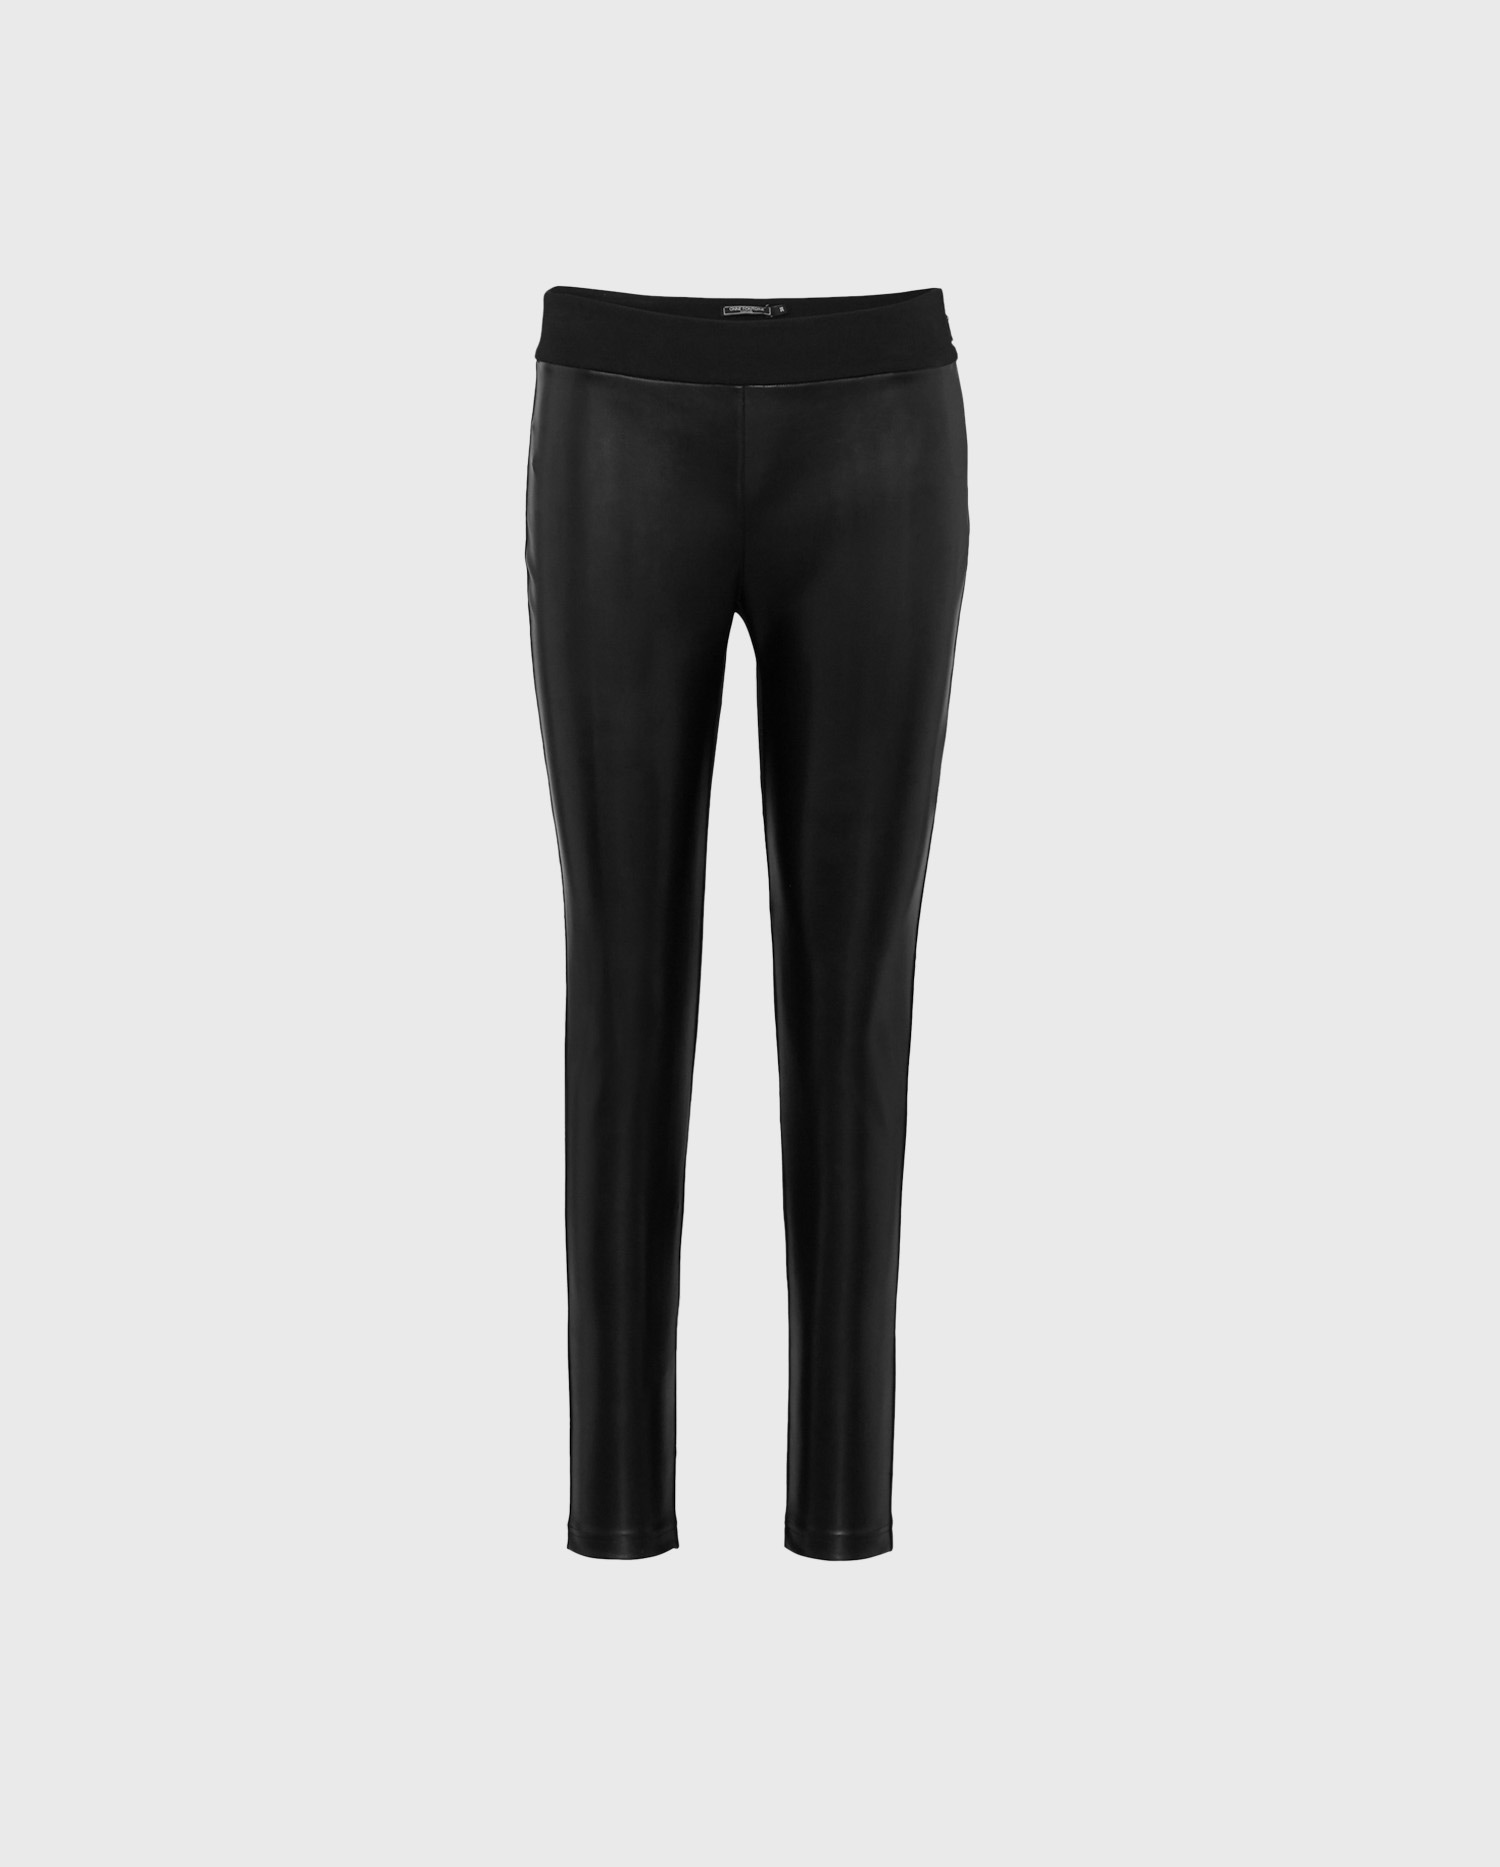 Discover the BONDY Mixed material faux leather leggings from ANNE FONTAINE